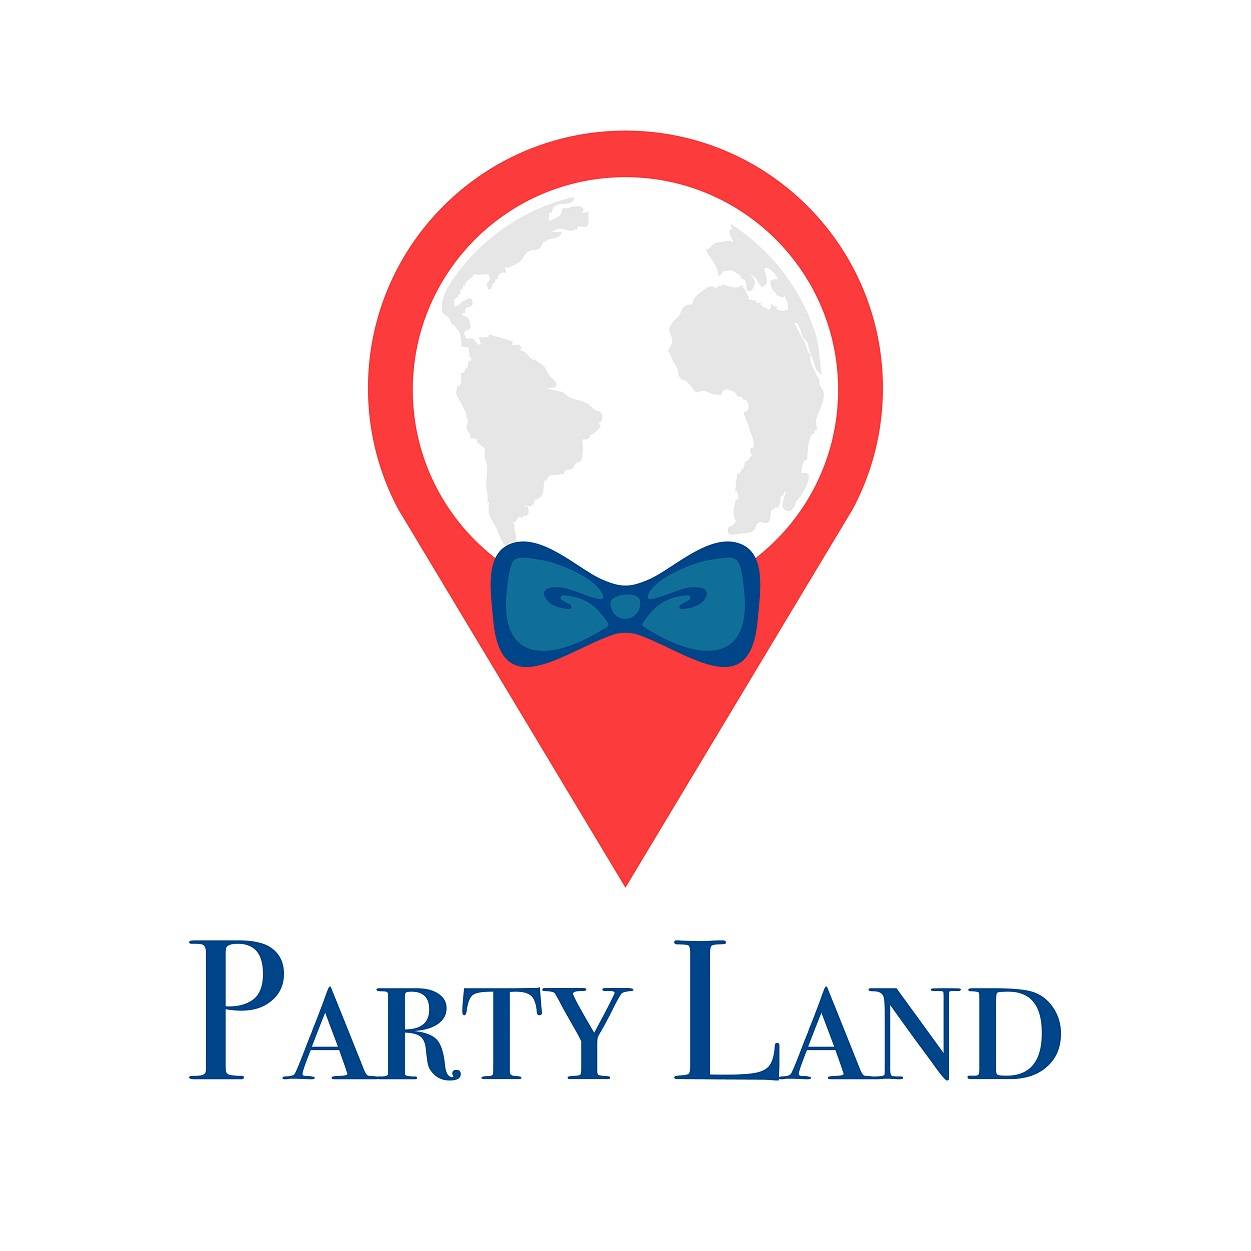 Party land real estate logo with location map vector